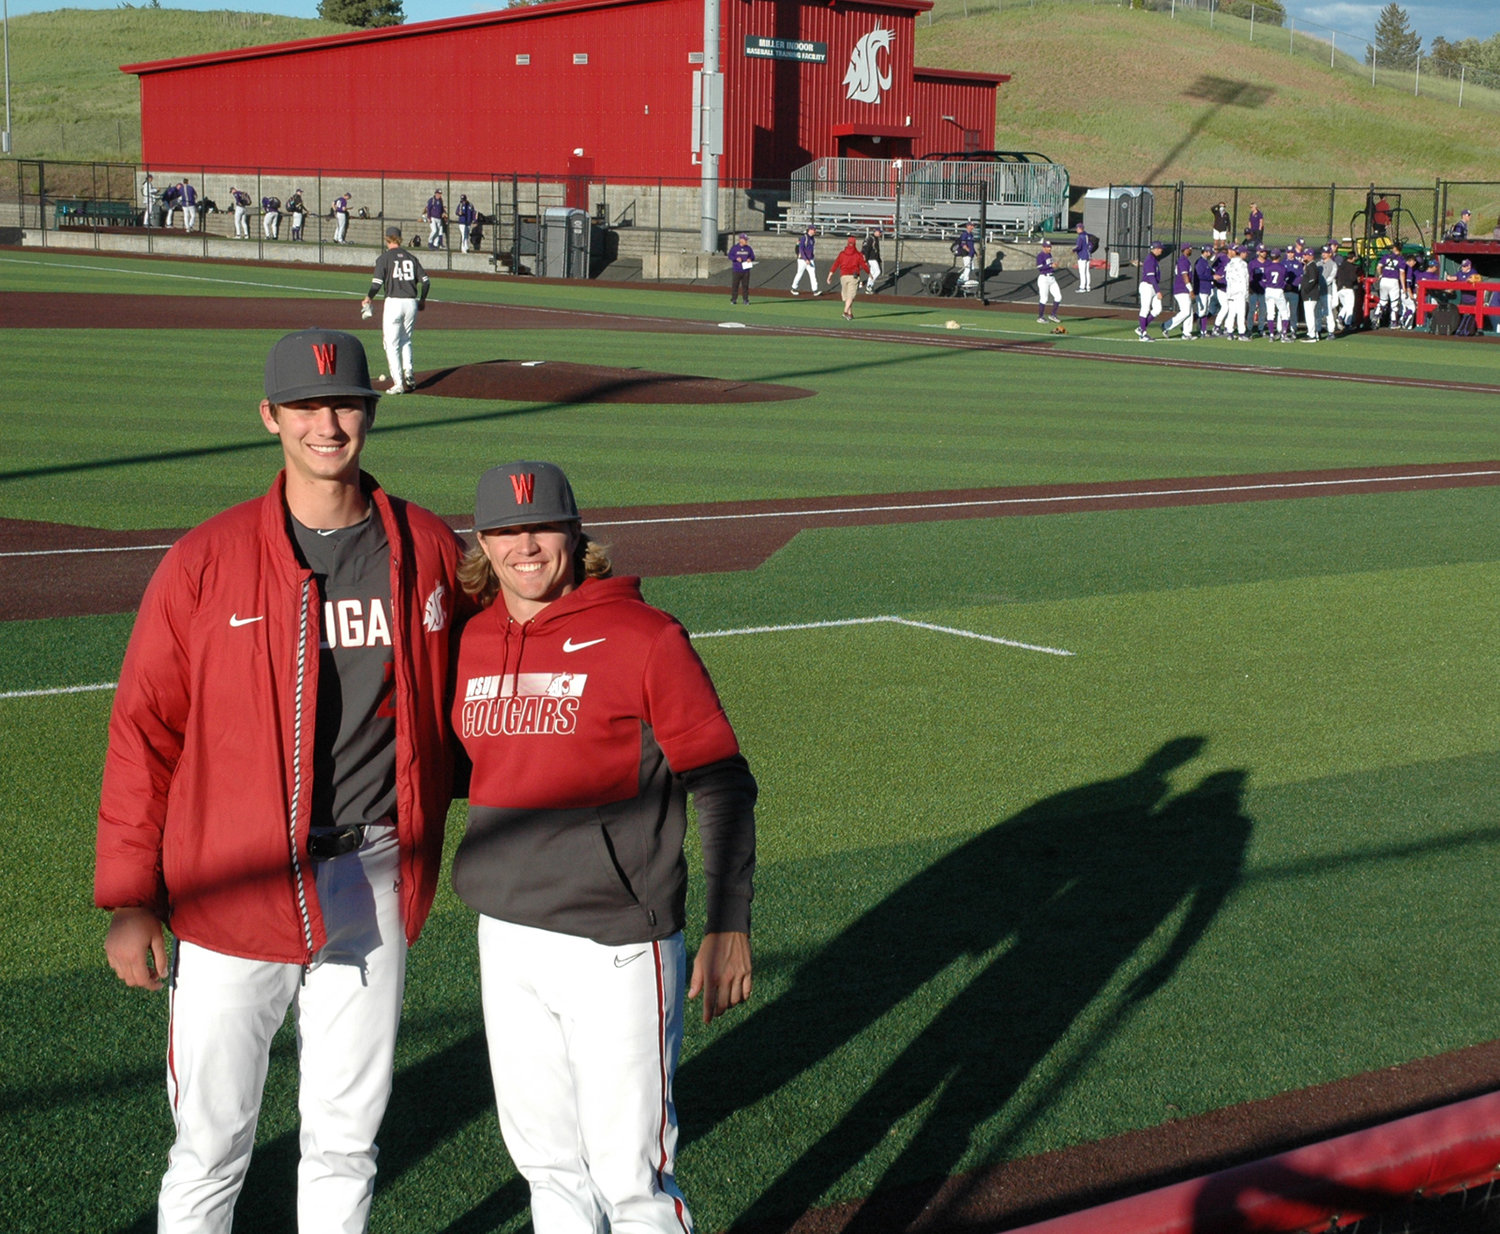 Washington State University's Brandon White (left) and Dakota Hawkins pose for a photo at Bailey-Brayton Field in Pullman after a win over the University of Washington on May 29.